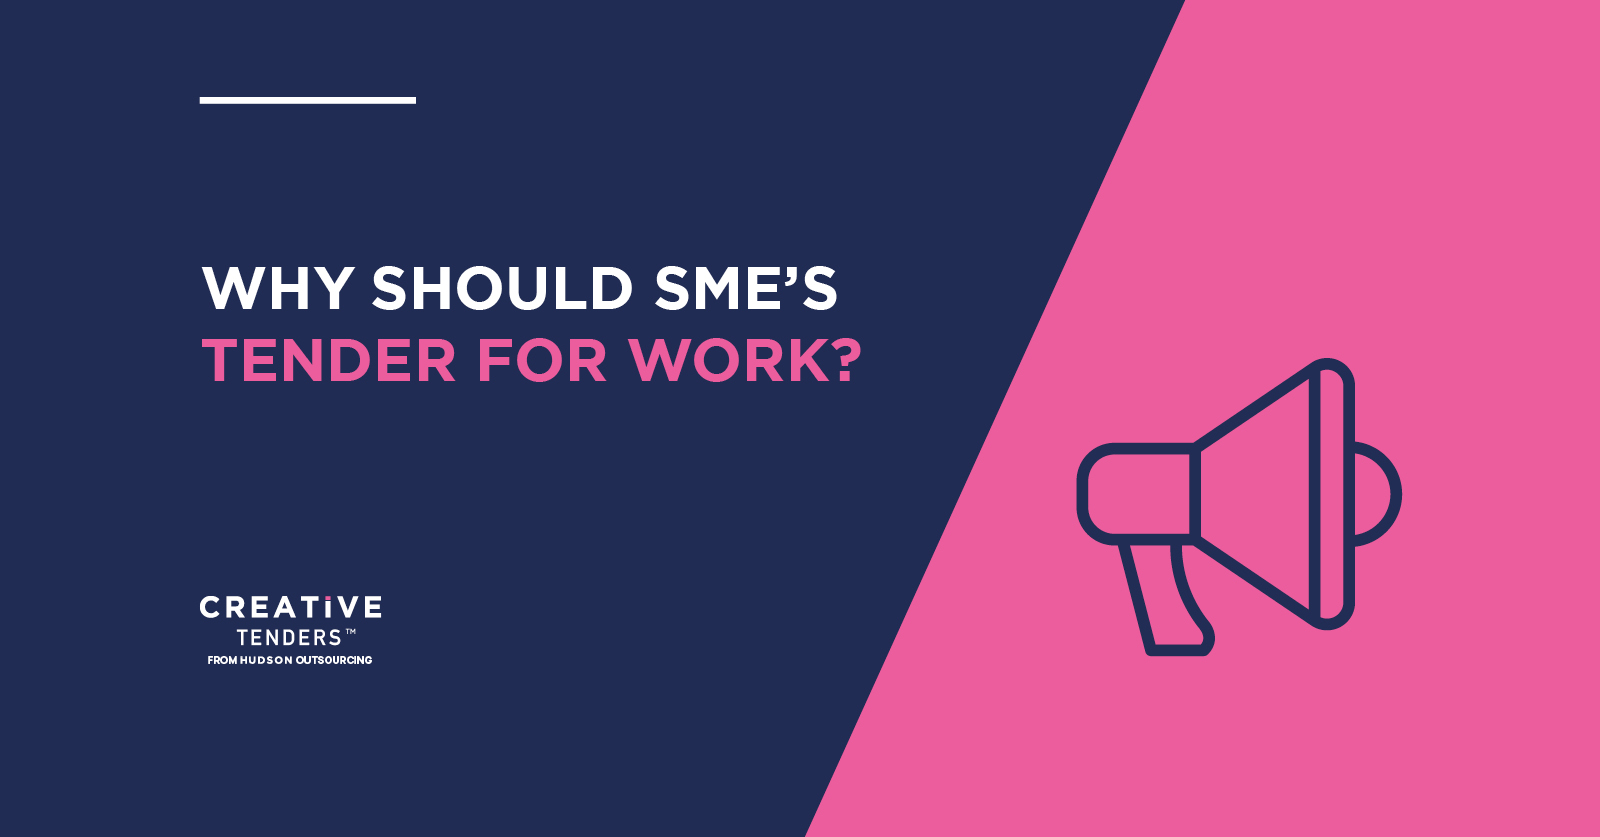 Why should SMEs tender for work through digital marketplace?